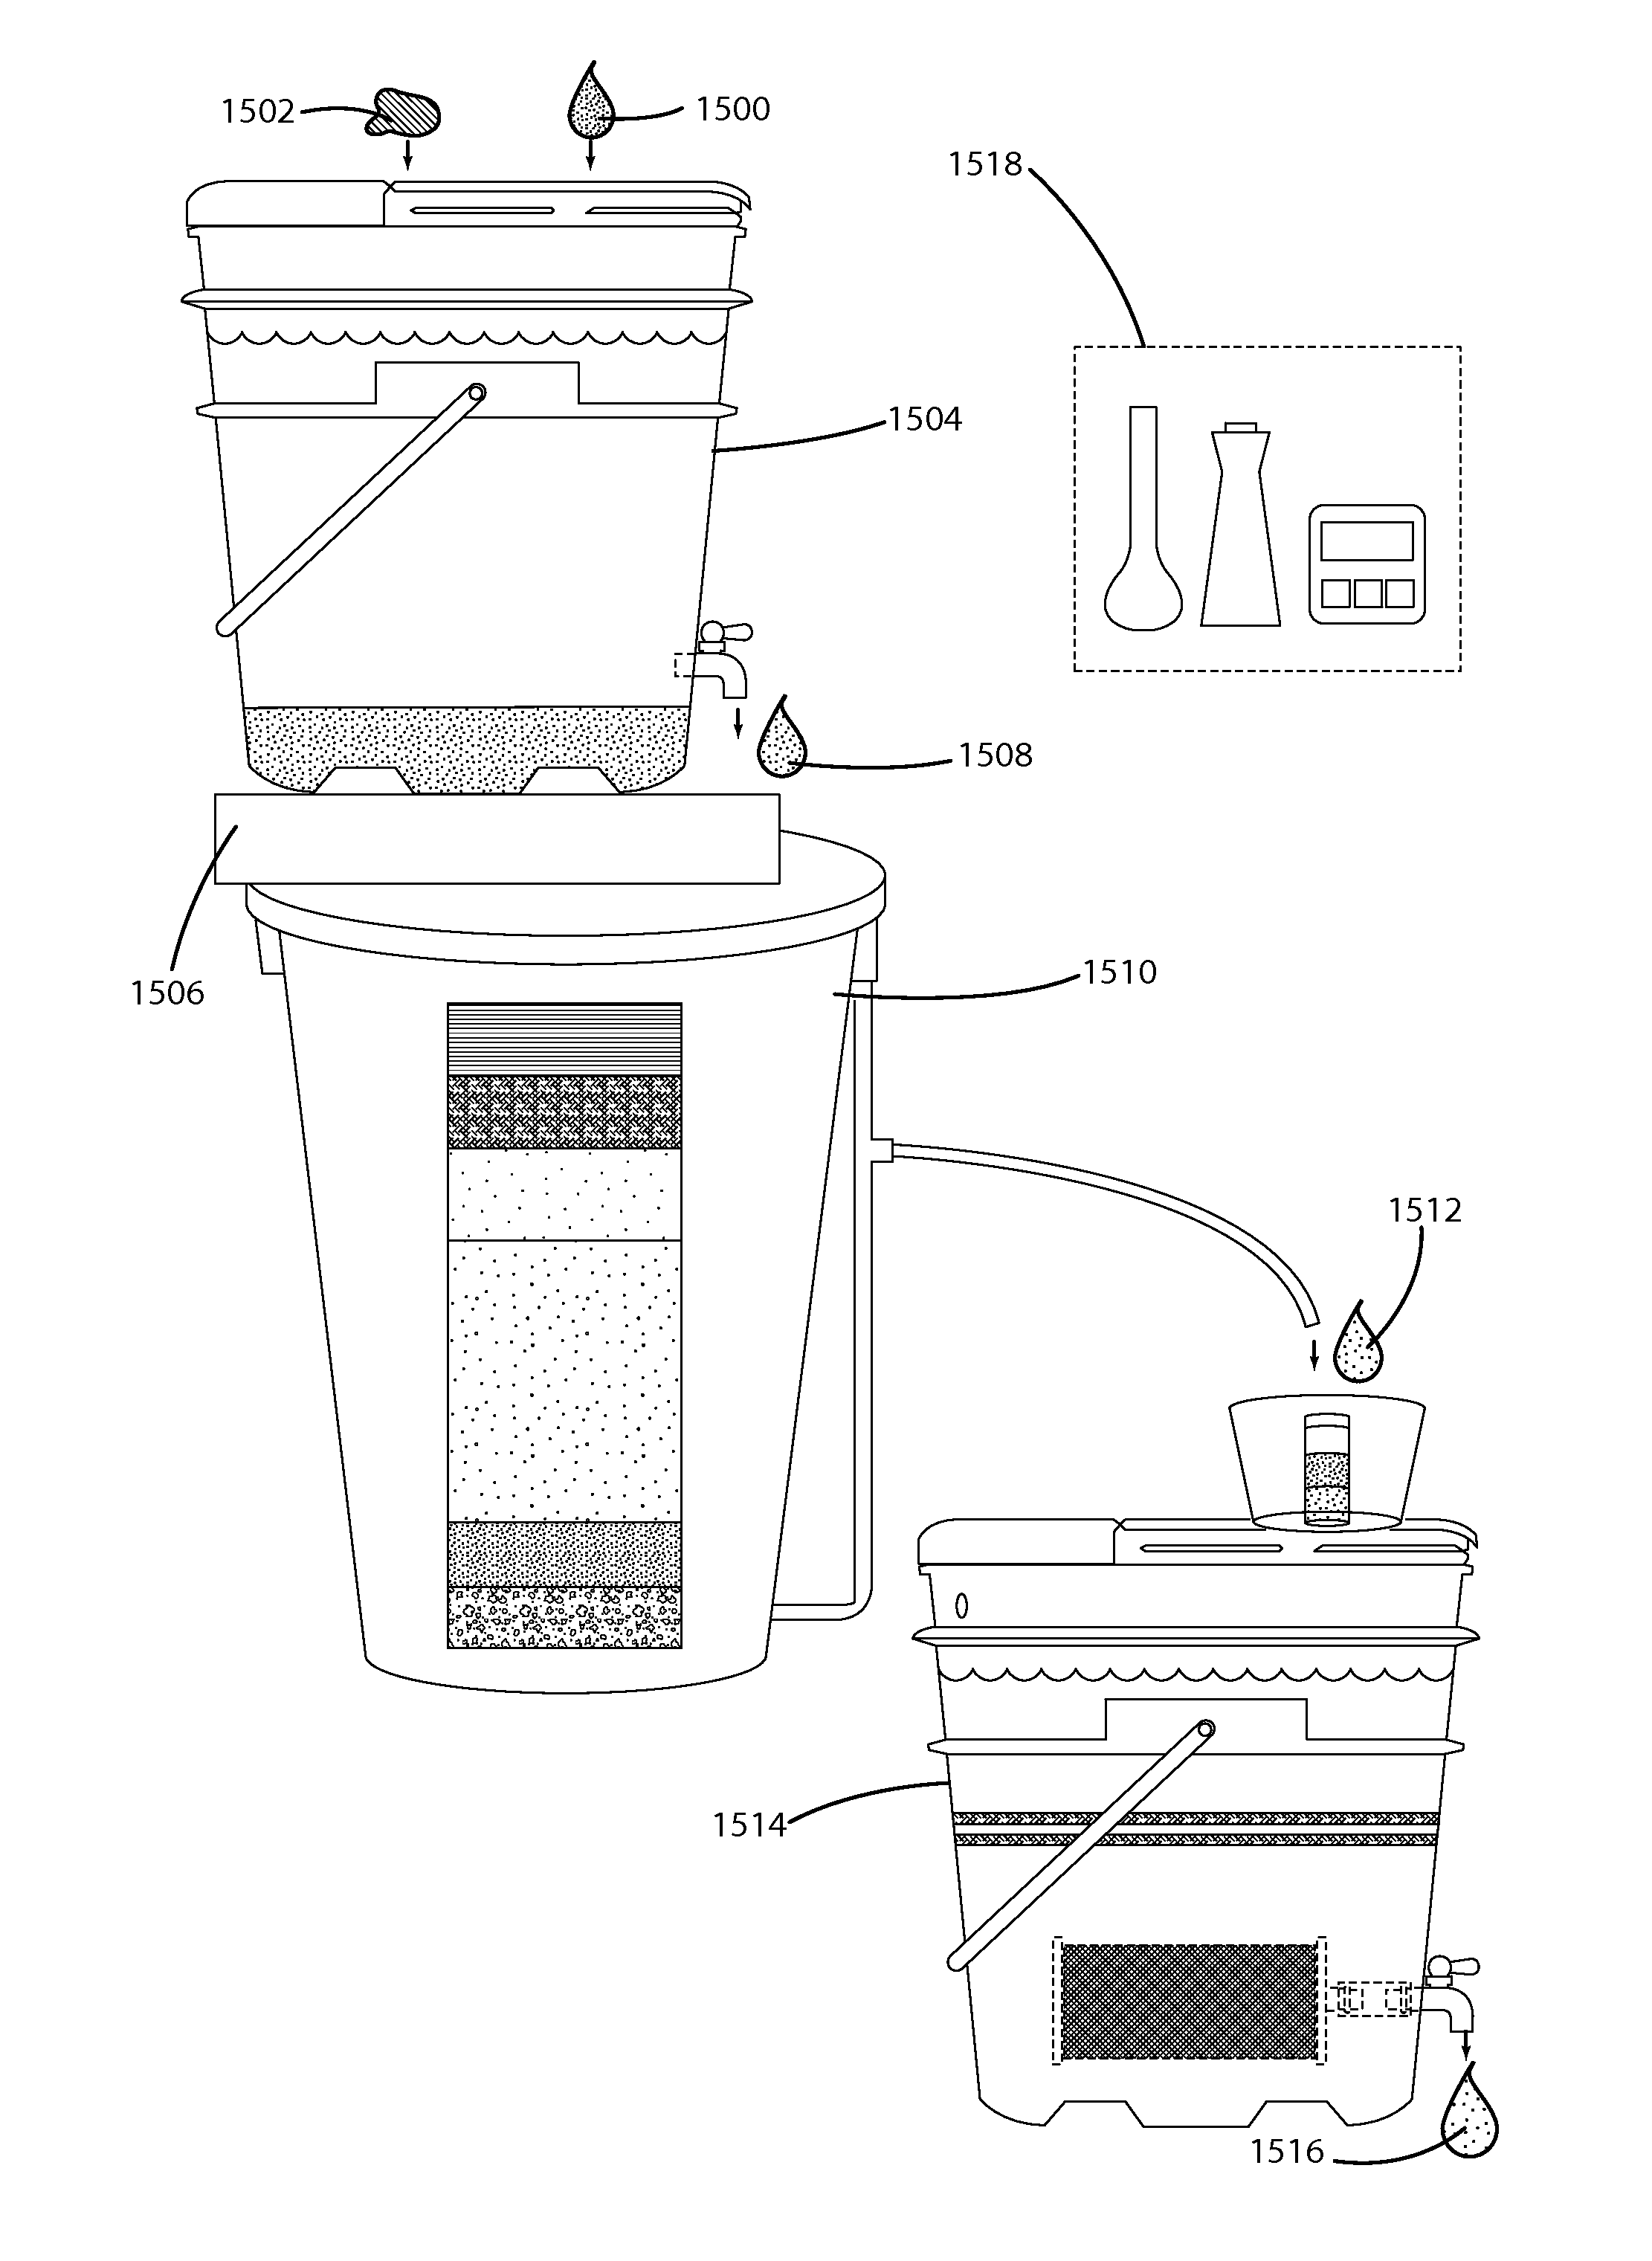 Gravity feed water treatment system